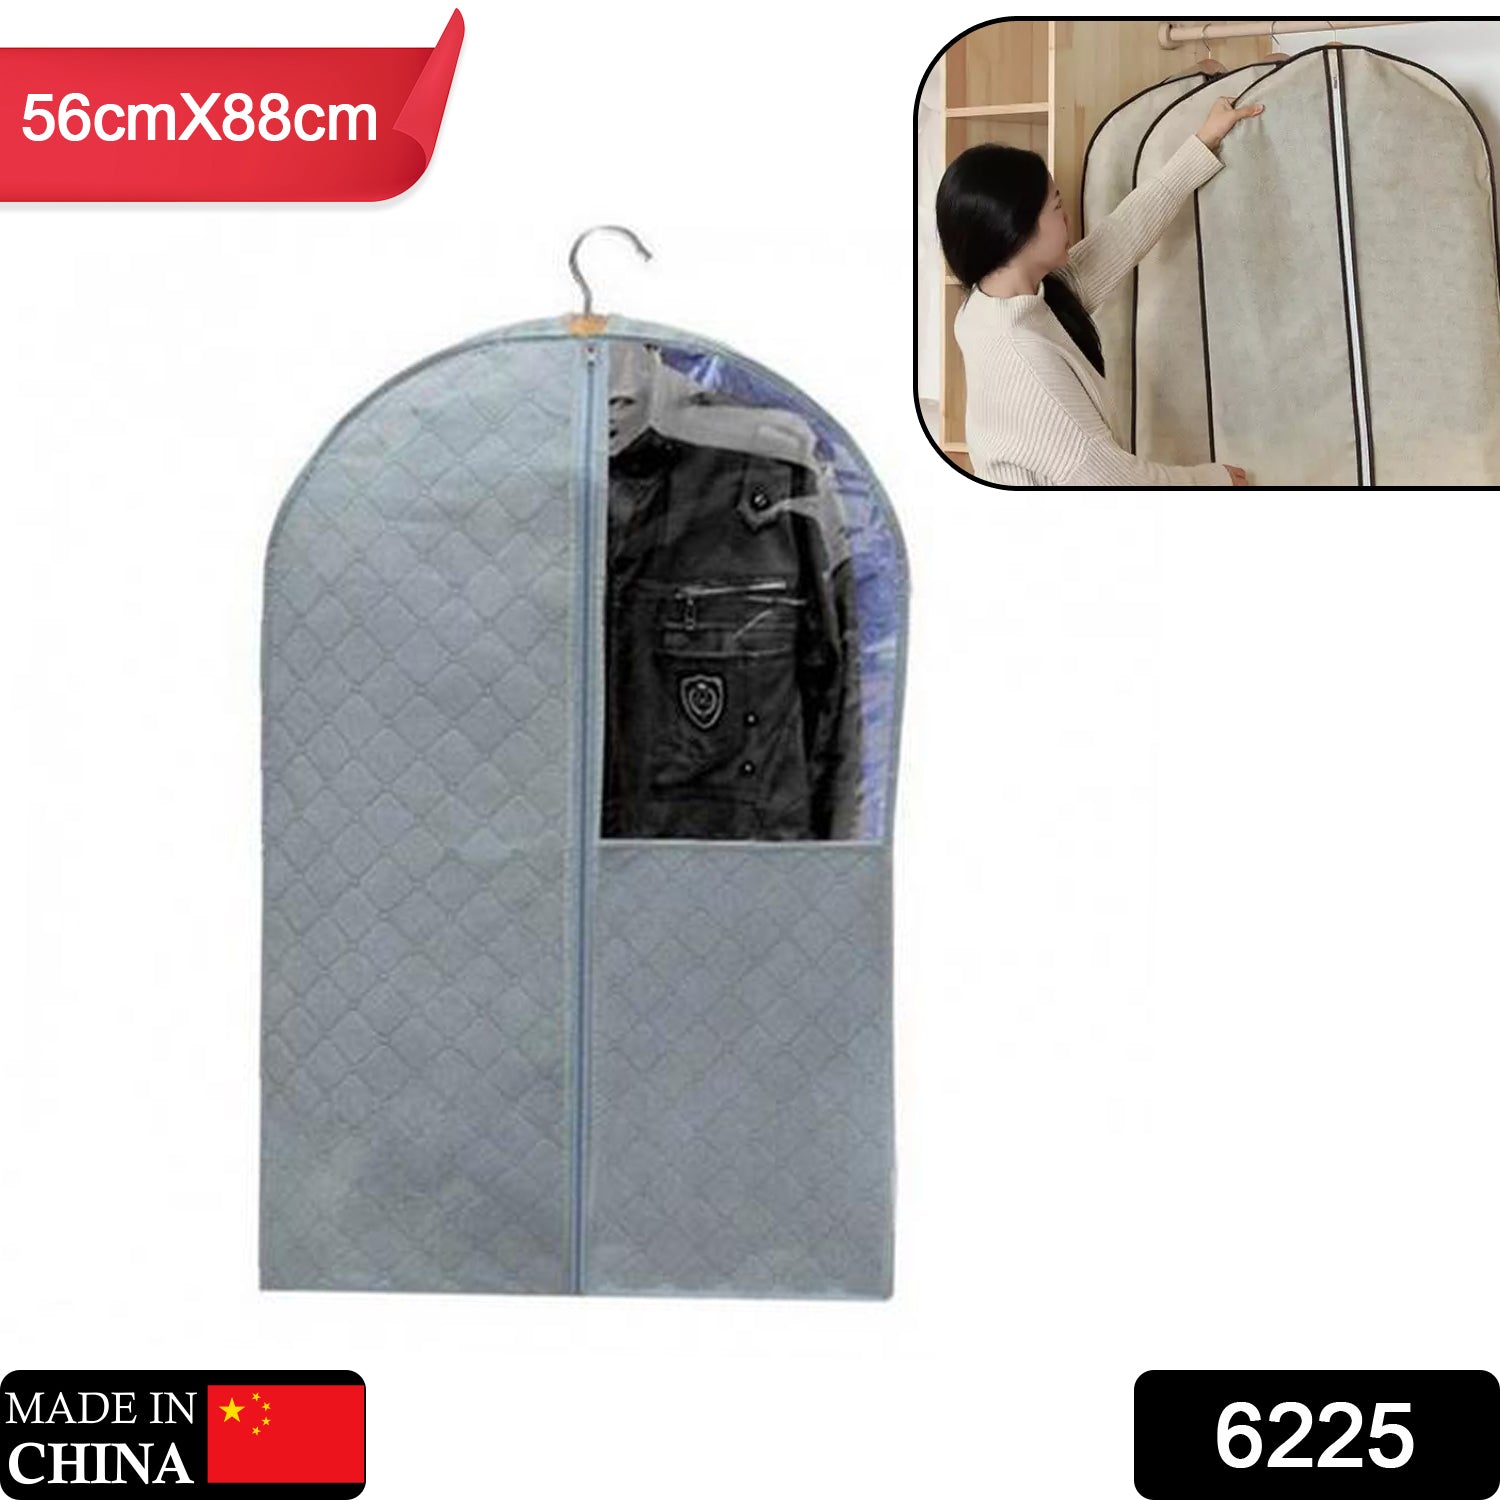 Amazon.com: MecTo Garment Bags Set of 2, Dust-Proof Garment Bags for  Hanging Clothes, Suit Bag for Storage and Travel with Clear Window,  Breathable Dress Bags for Gowns Suits Coats (Grey, 23.3 x